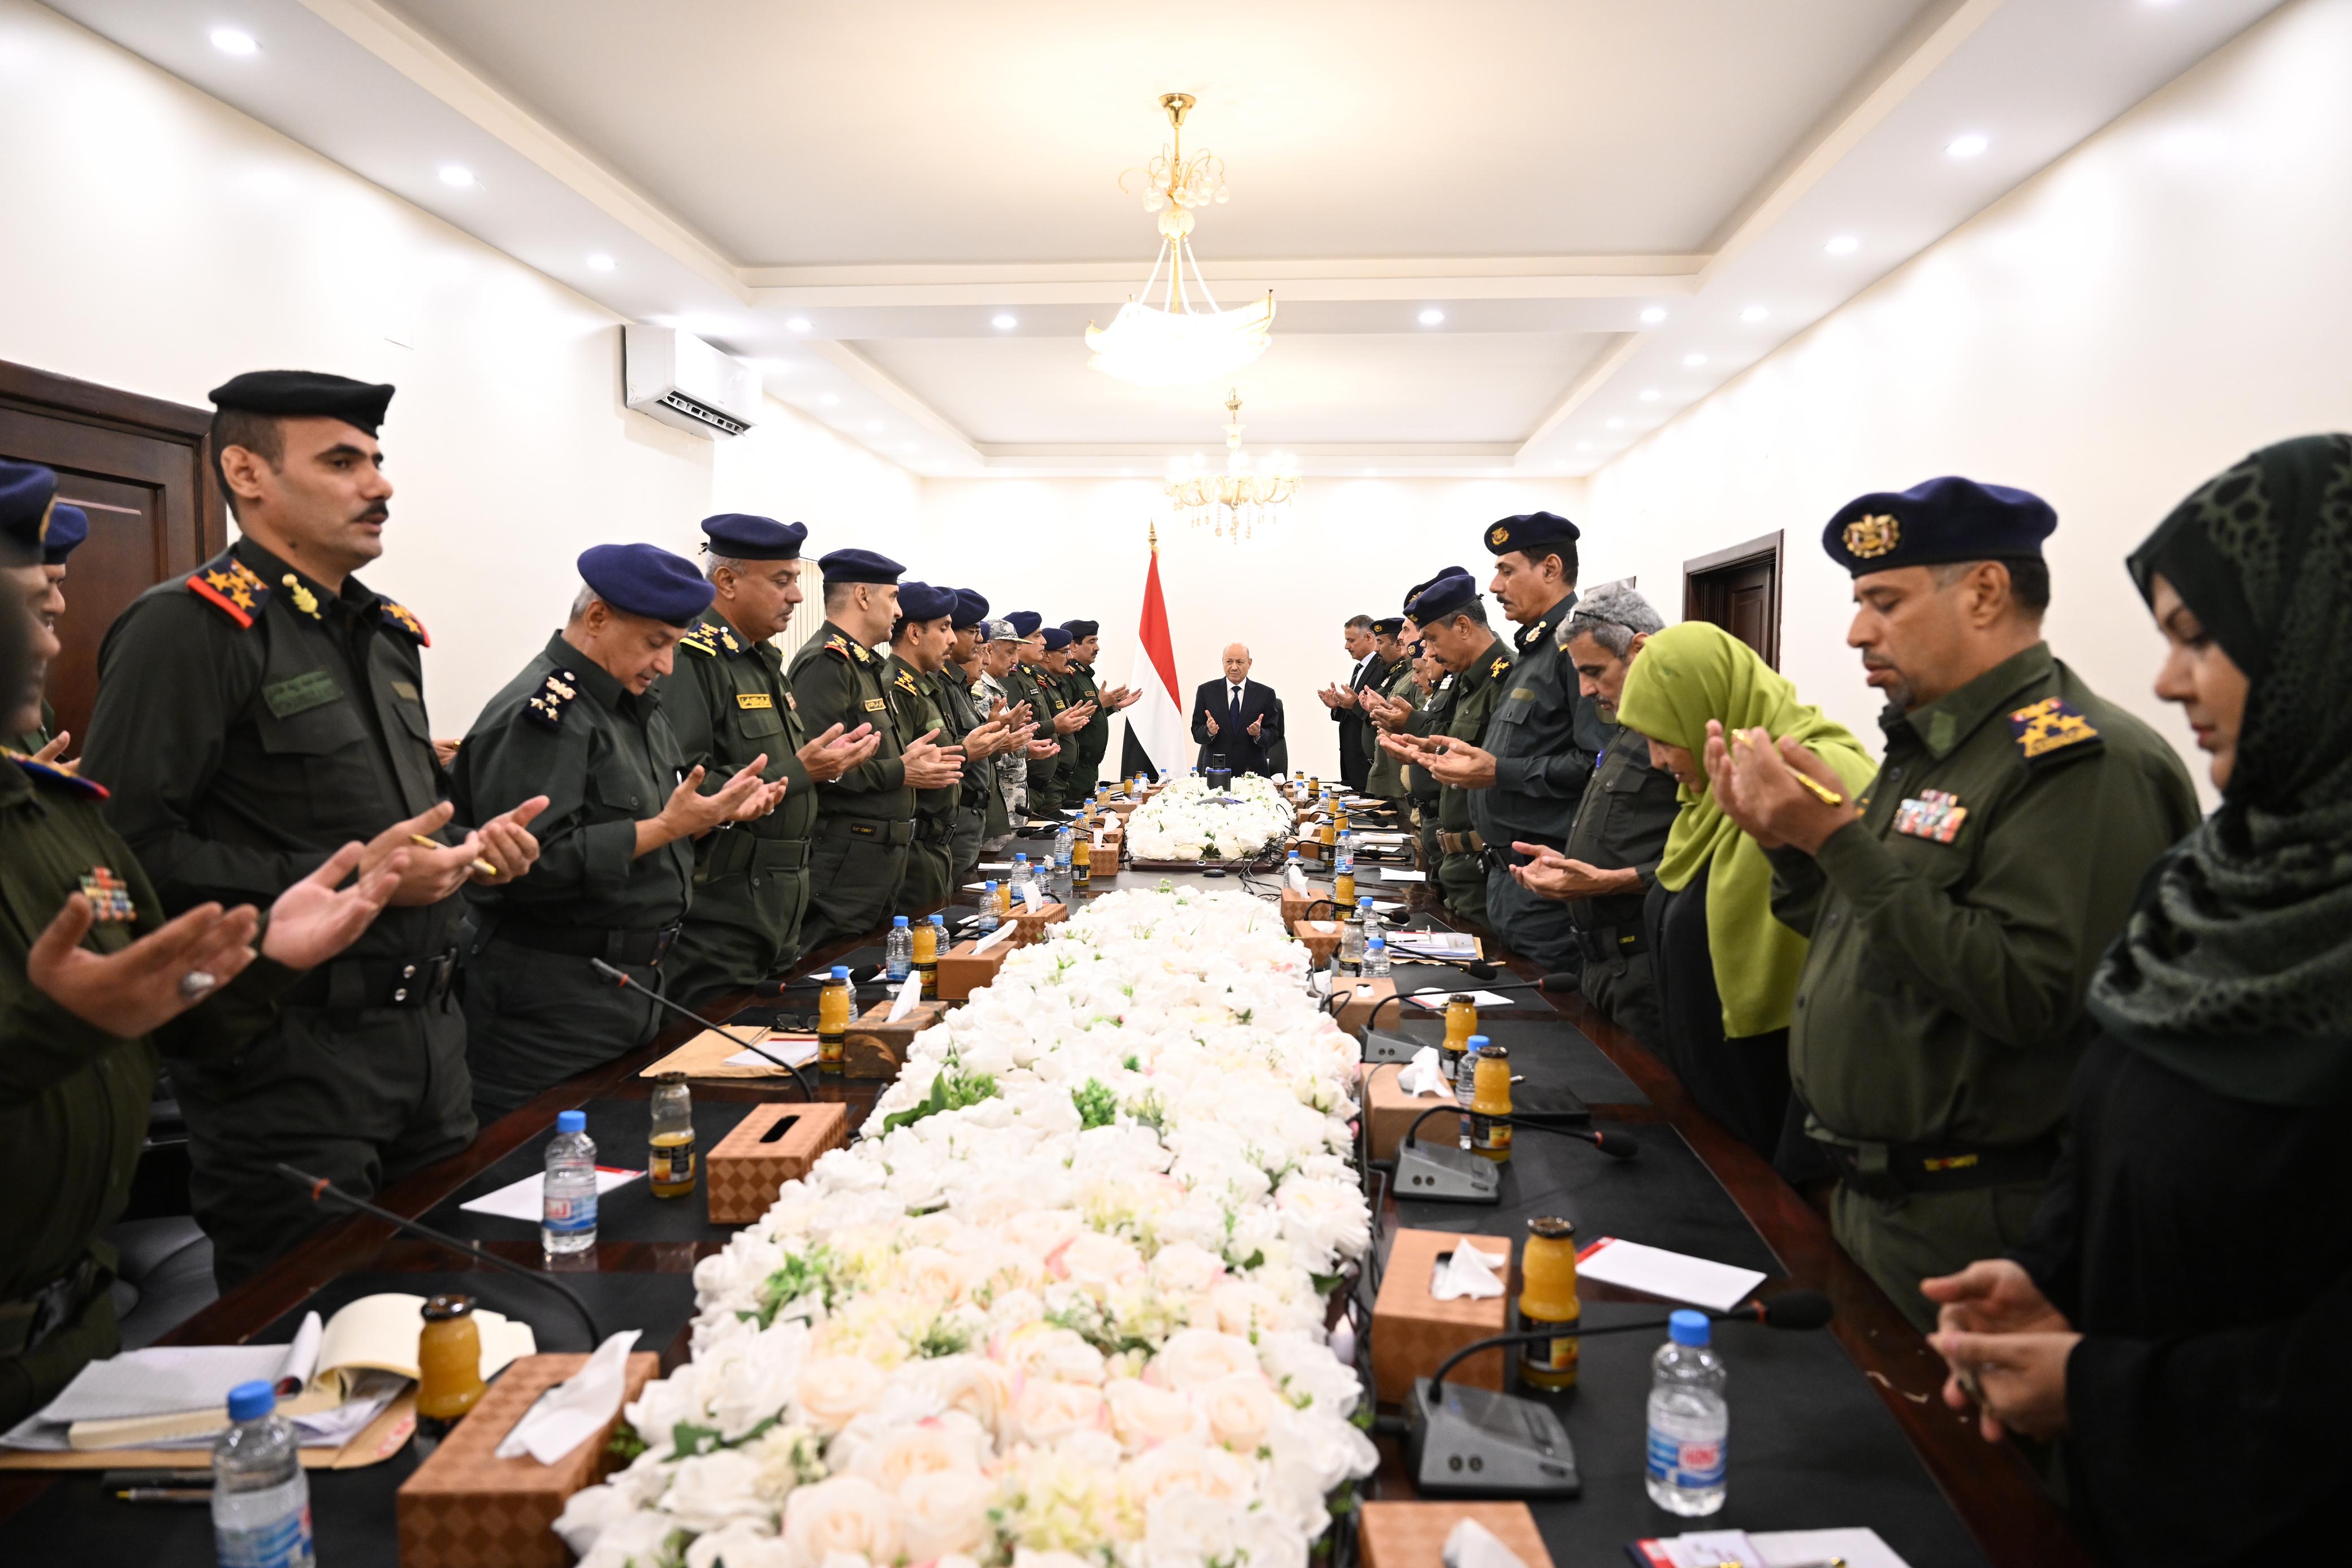 PRESIDENT AL-ALIMI MEETS WITH MINISTRY OF INTERIOR LEADERSHIP, HEADS OF SECURITY AGENCIES, AND GENERAL DIRECTORS OF POLICE IN GOVERNORATES Wed ، 27 Mar 2024